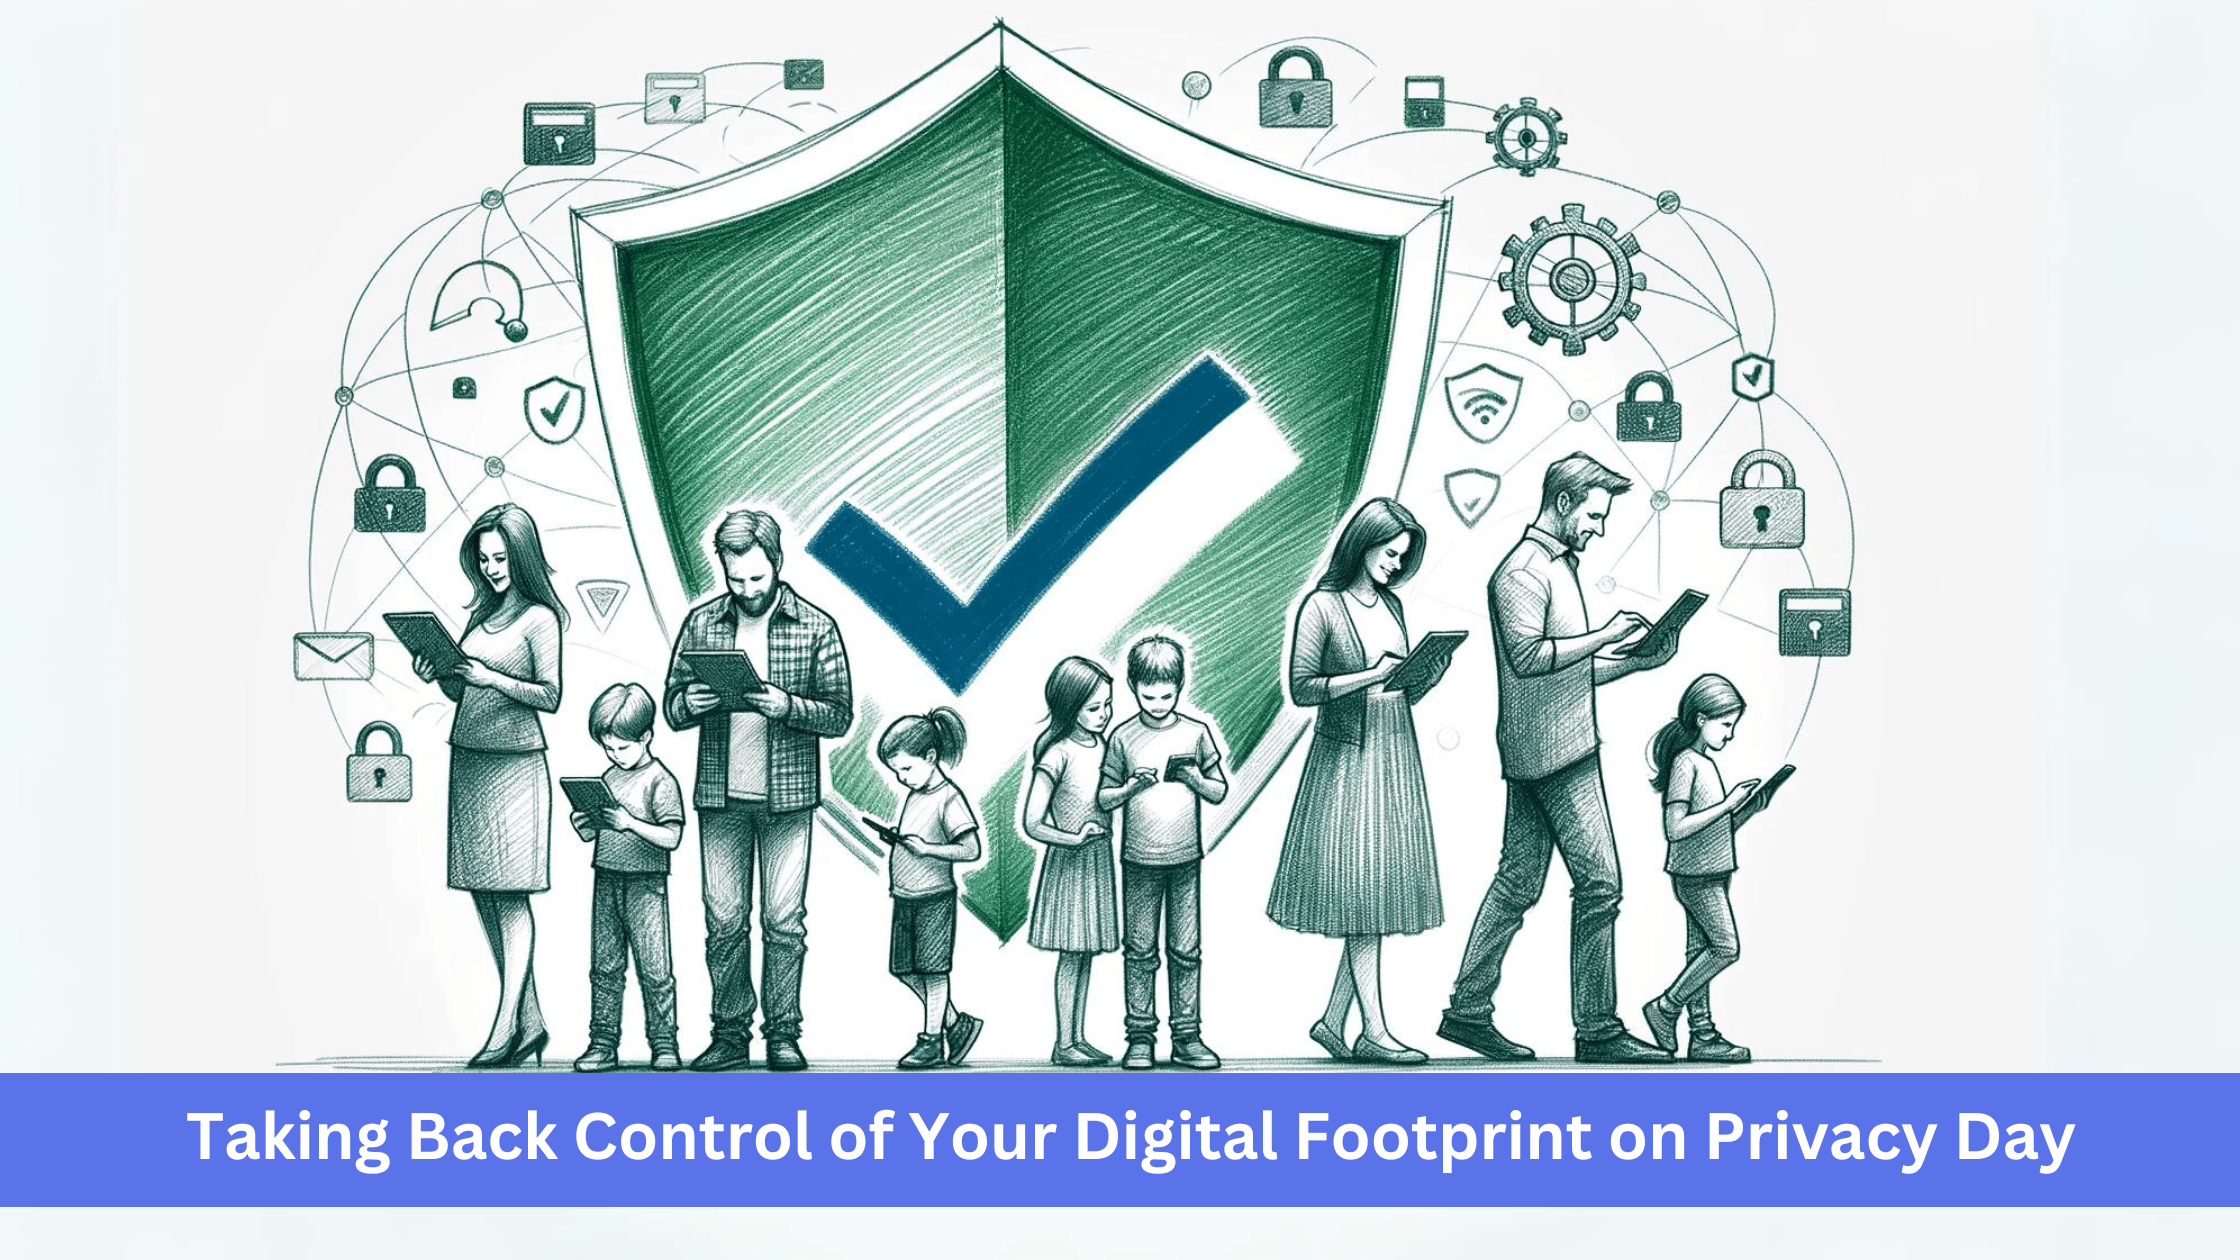 Taking Back Control of Your Digital Footprint